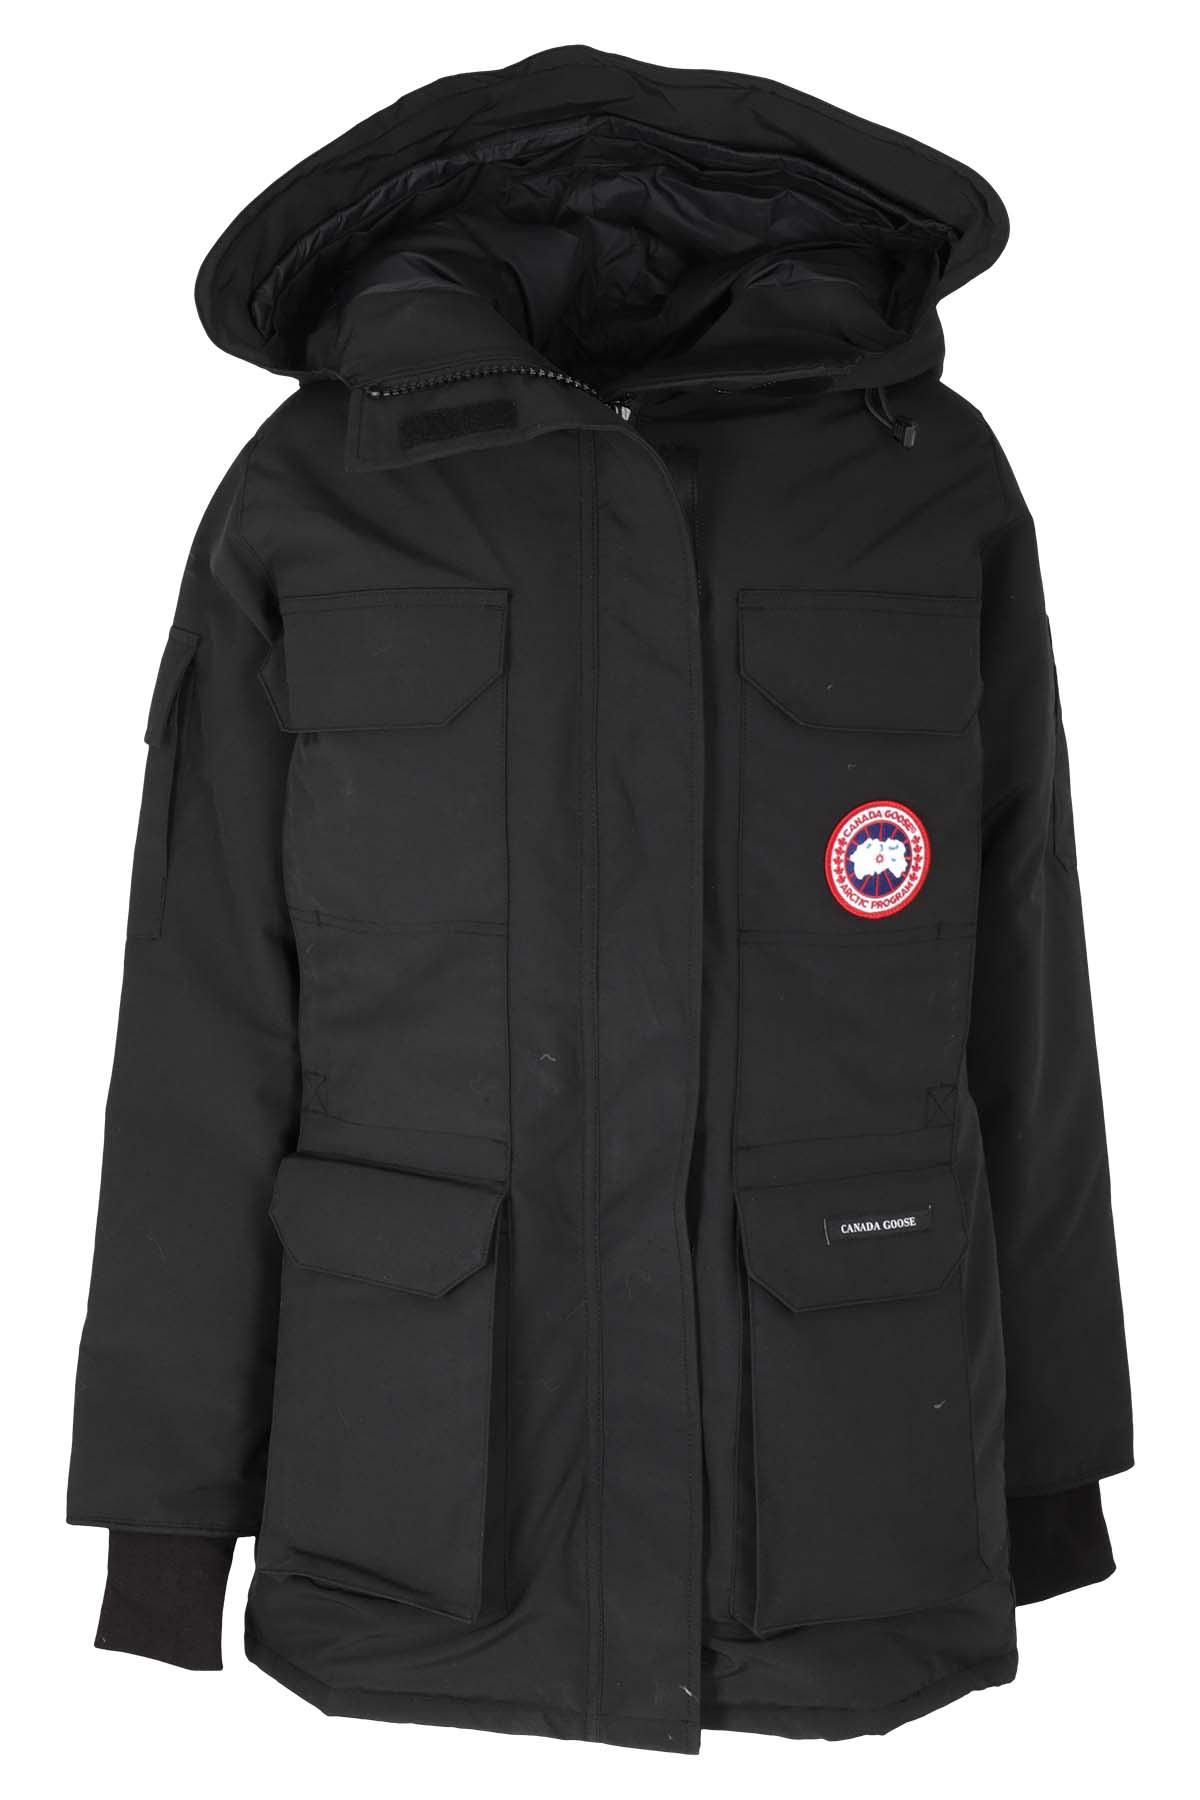 Canada Goose Expedition22 Parka in Black | Lyst